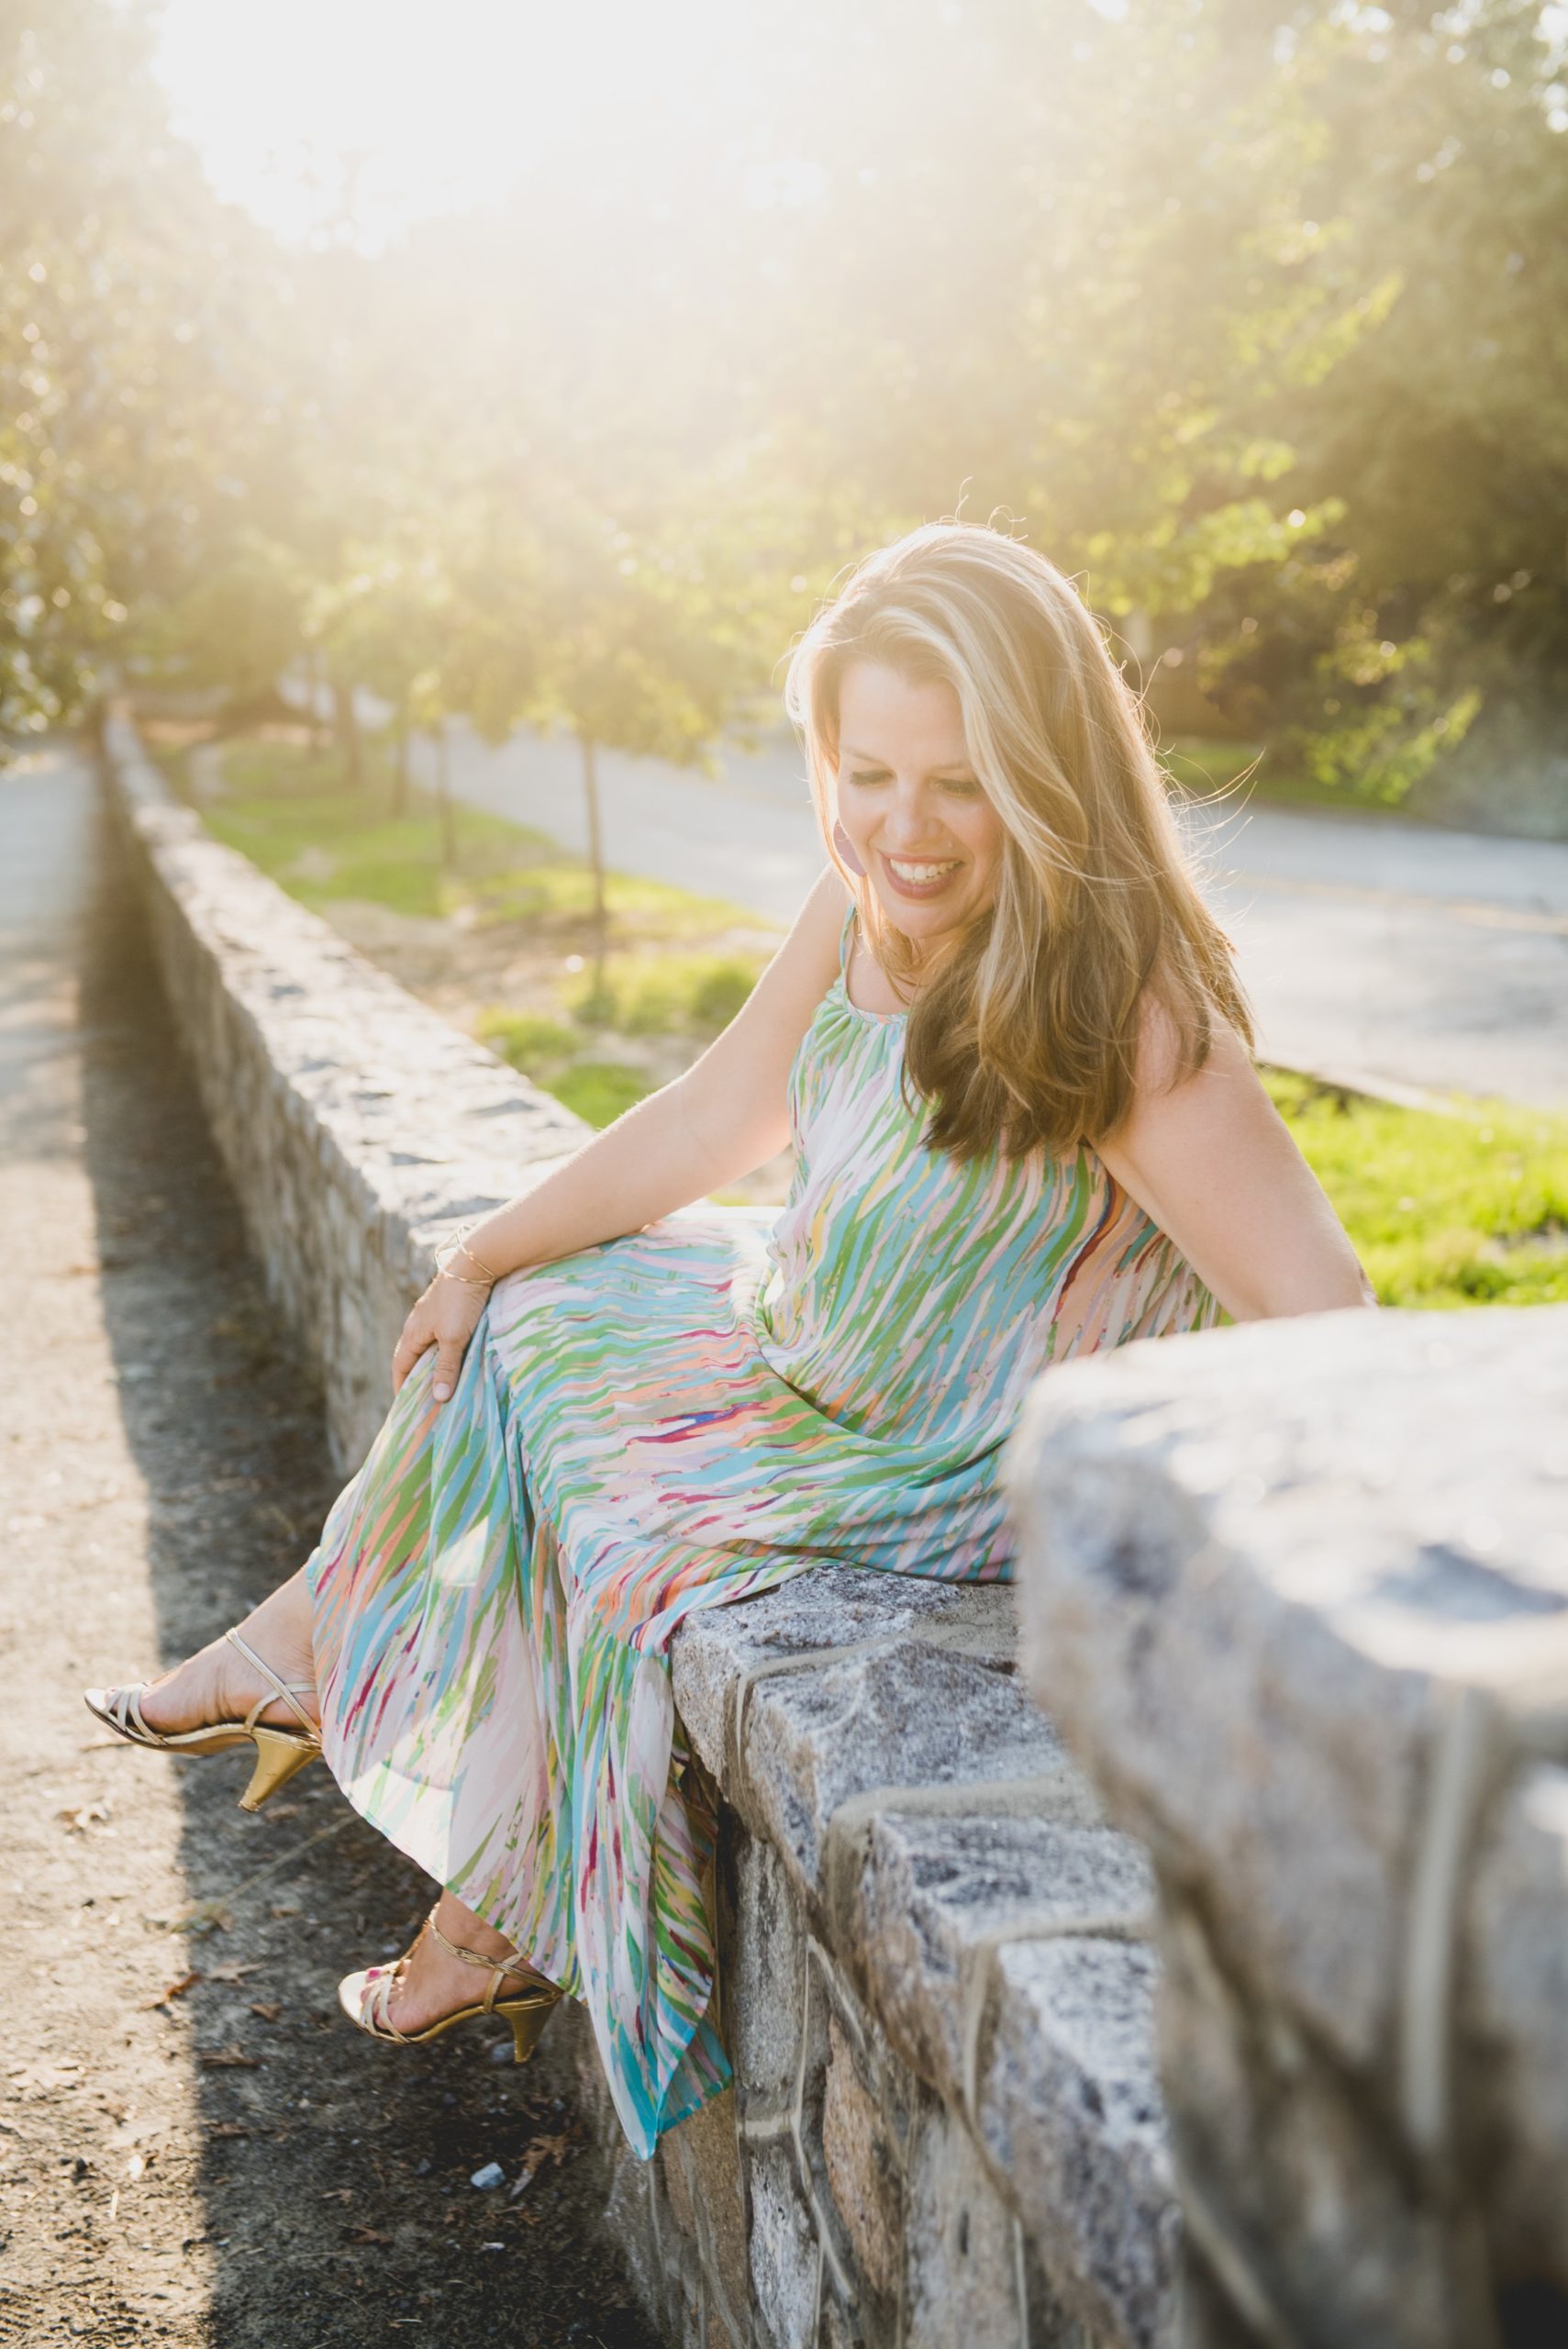 Woman with blond hair and pastel dress sitting on a rock wall outdoors